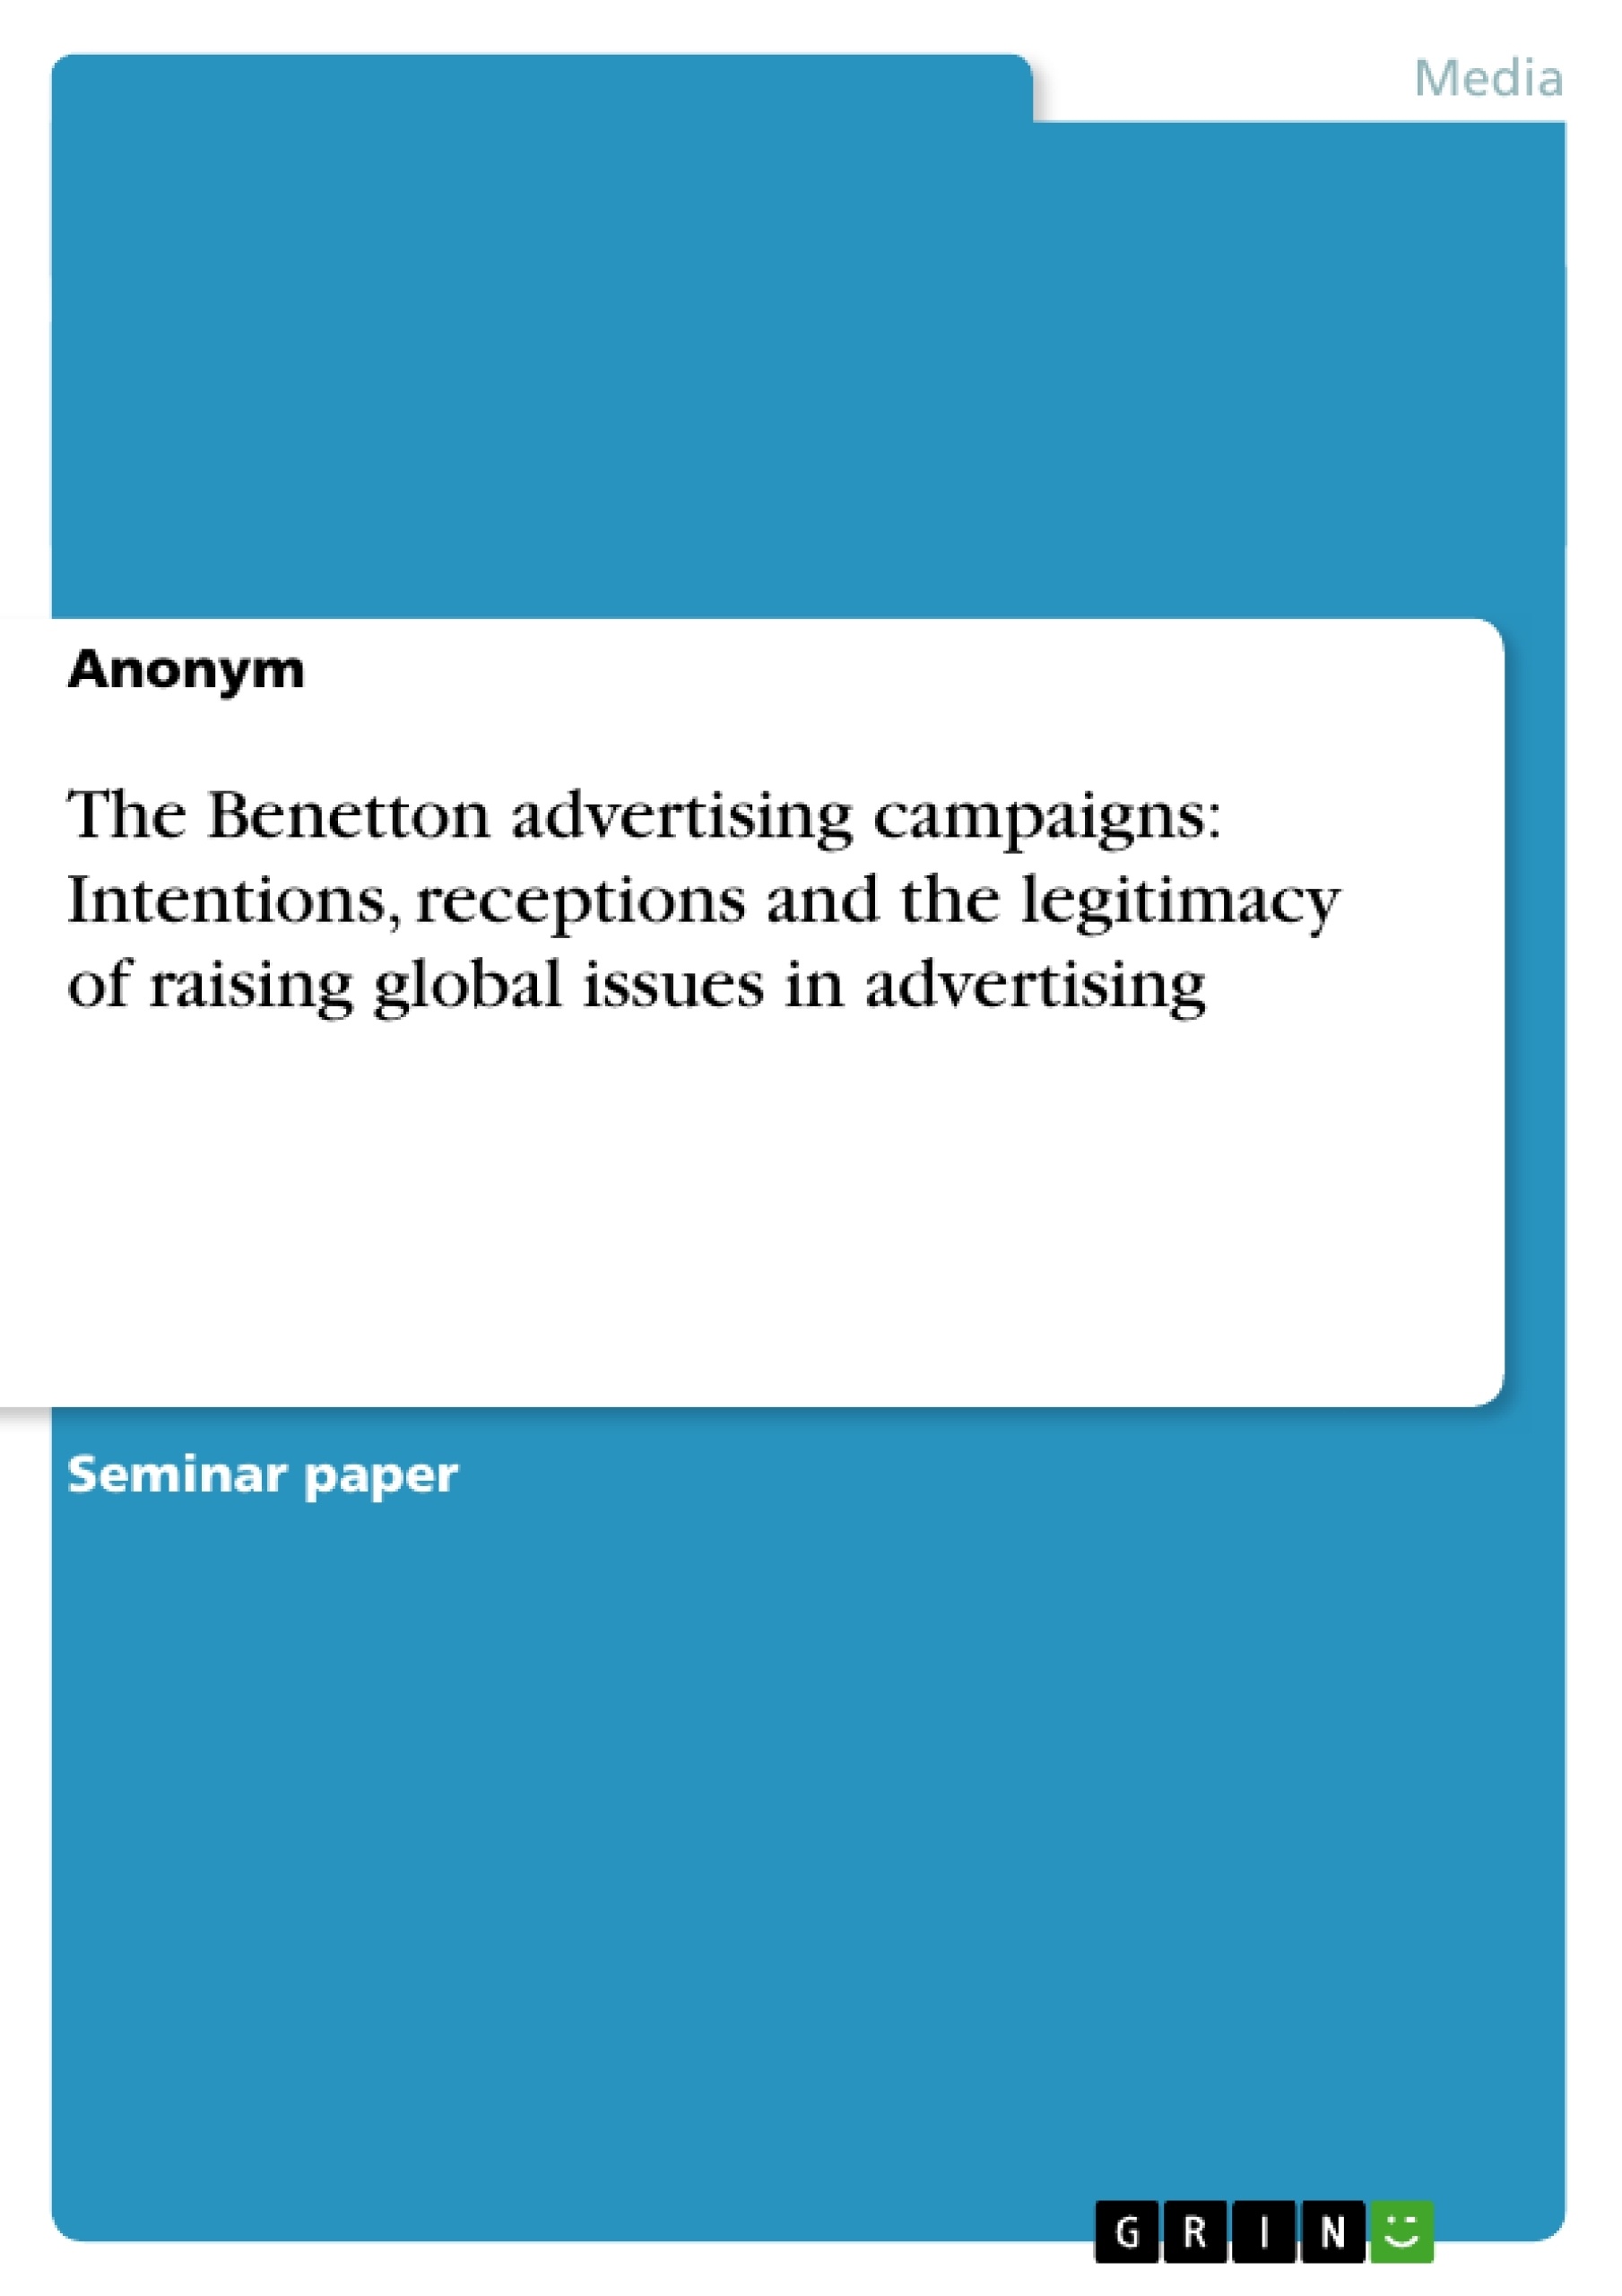 Title: The Benetton advertising campaigns: Intentions, receptions and the legitimacy of raising global issues in advertising